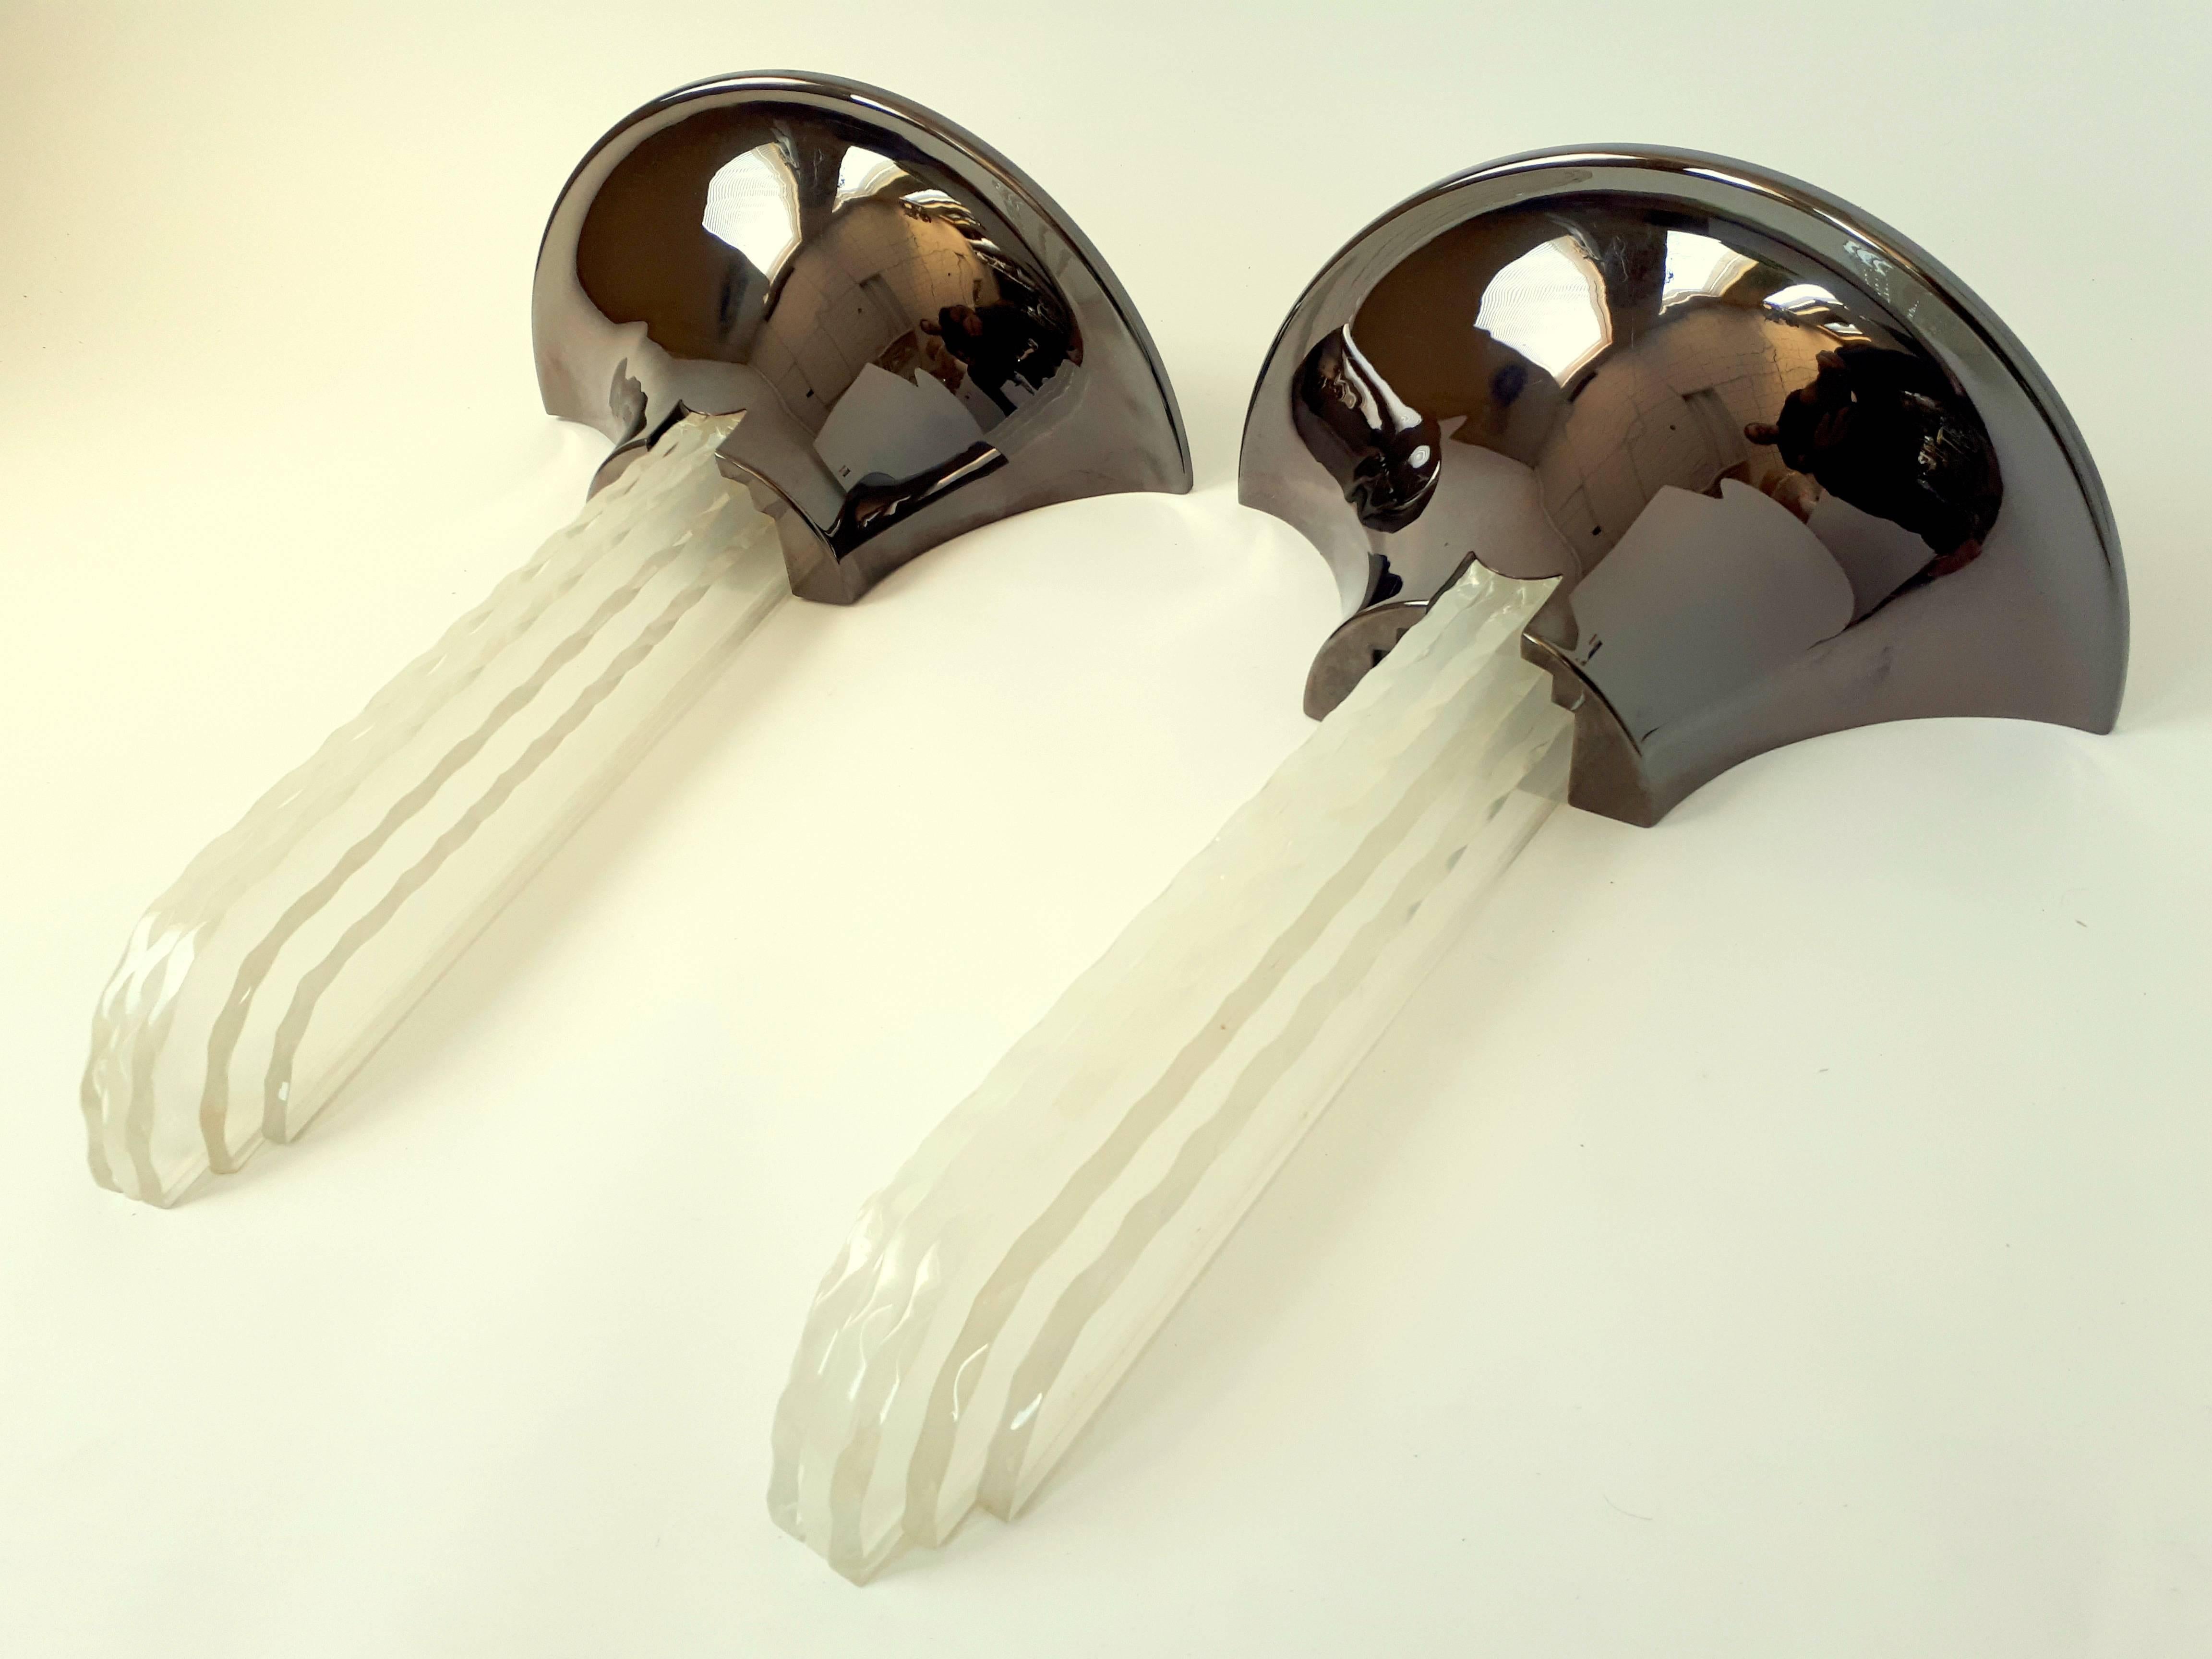 Massive Pair of Karl Springer Purcell  Sconces in Gun Metal finish , 1970s , USA For Sale 2